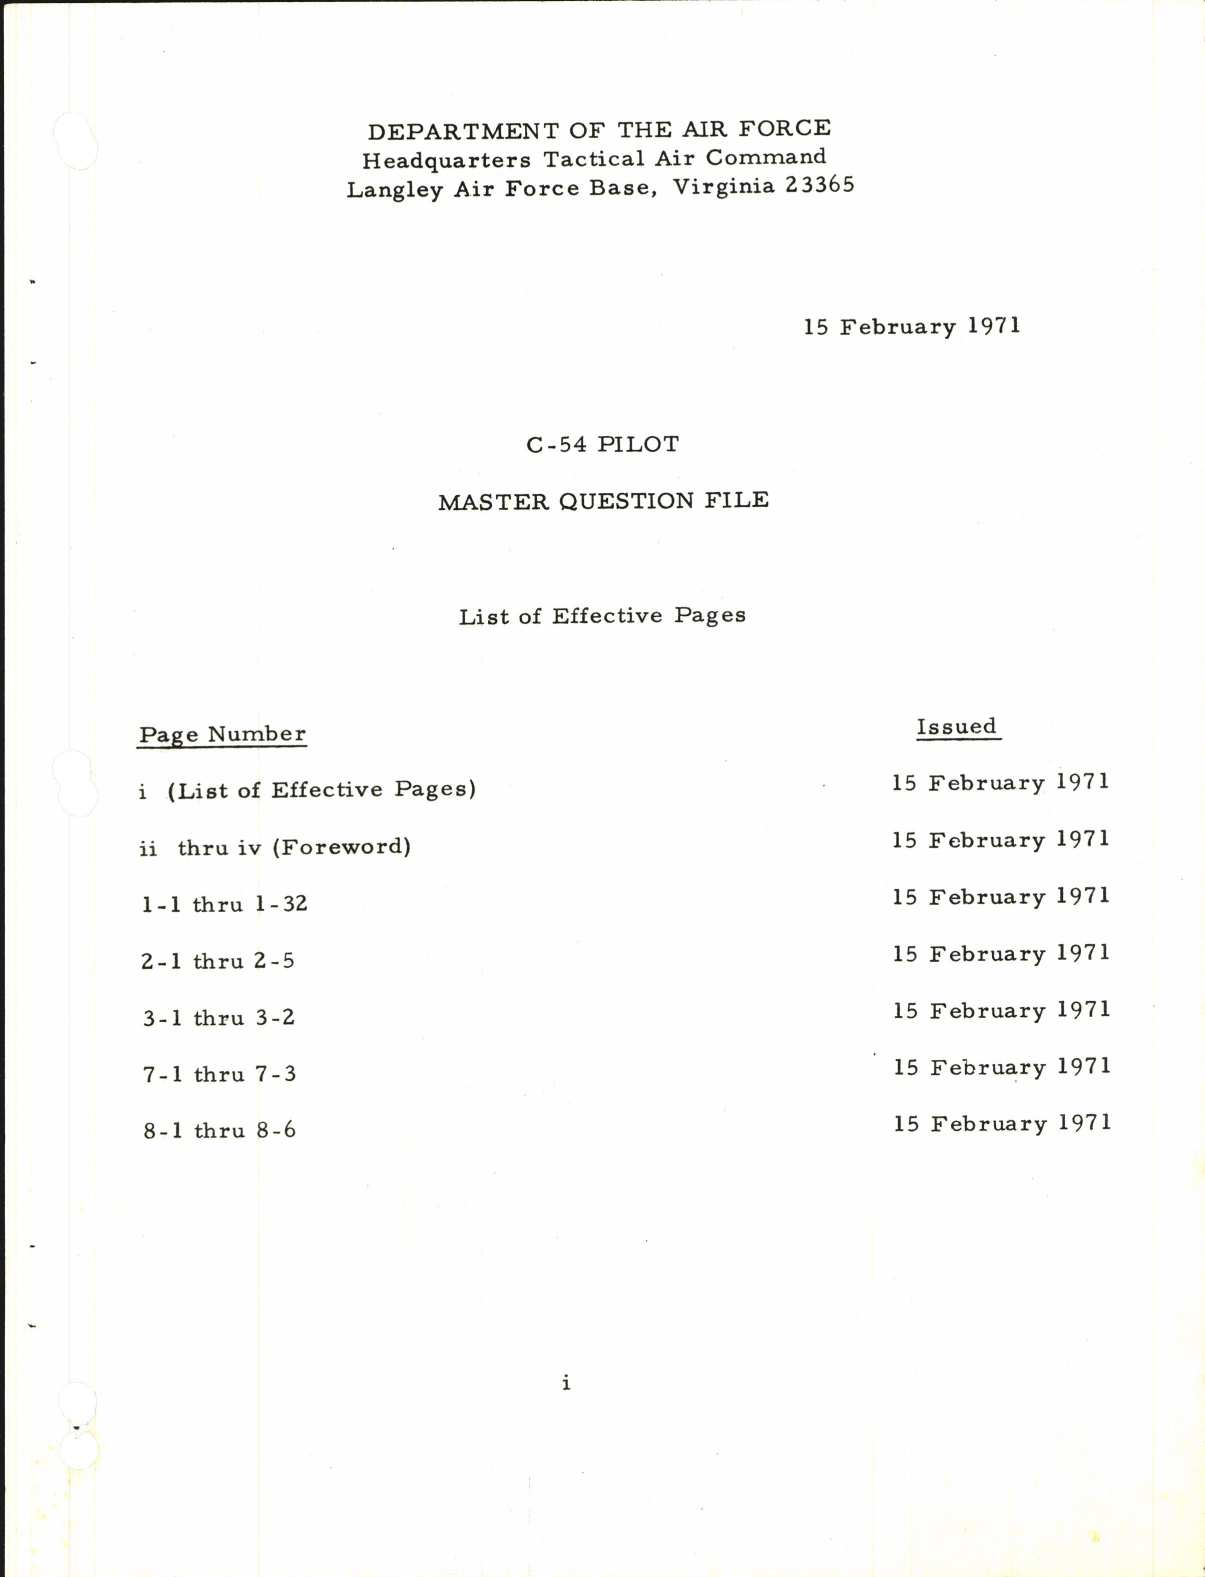 Sample page 5 from AirCorps Library document: C-54 Pilot Master Question File